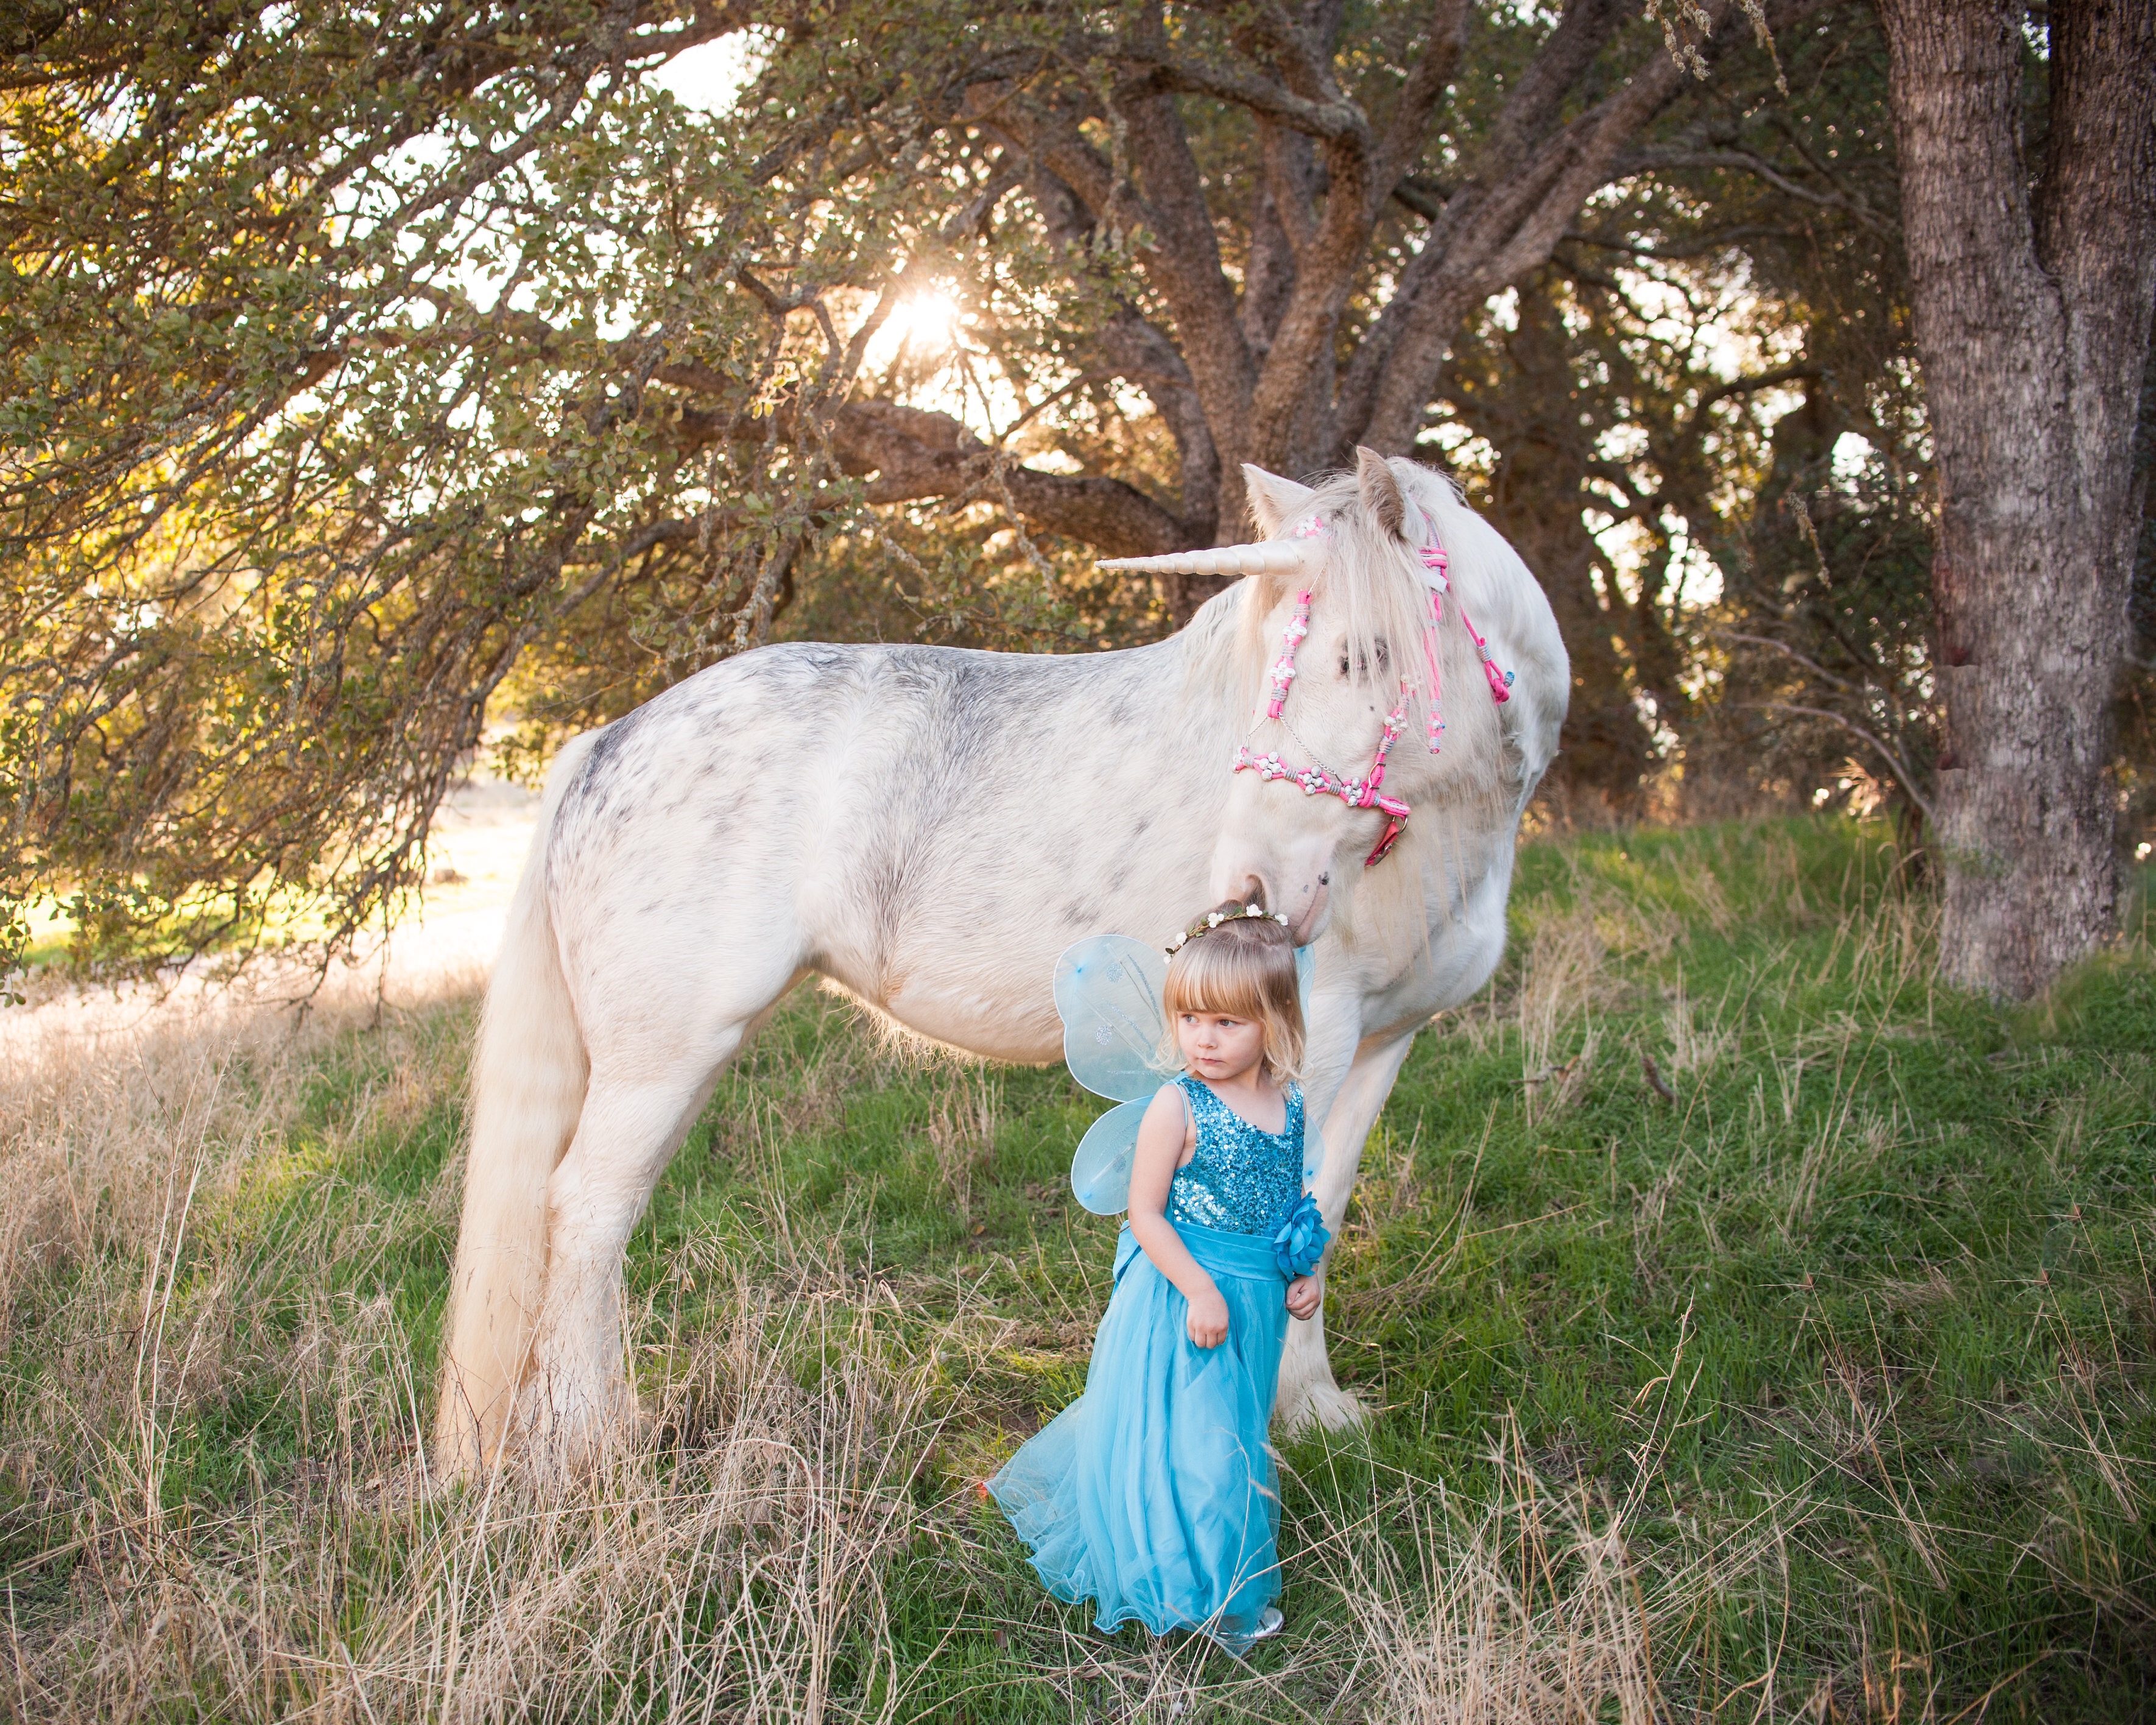 Unicorn and fairy princess look out toward the fields in Creston, California.